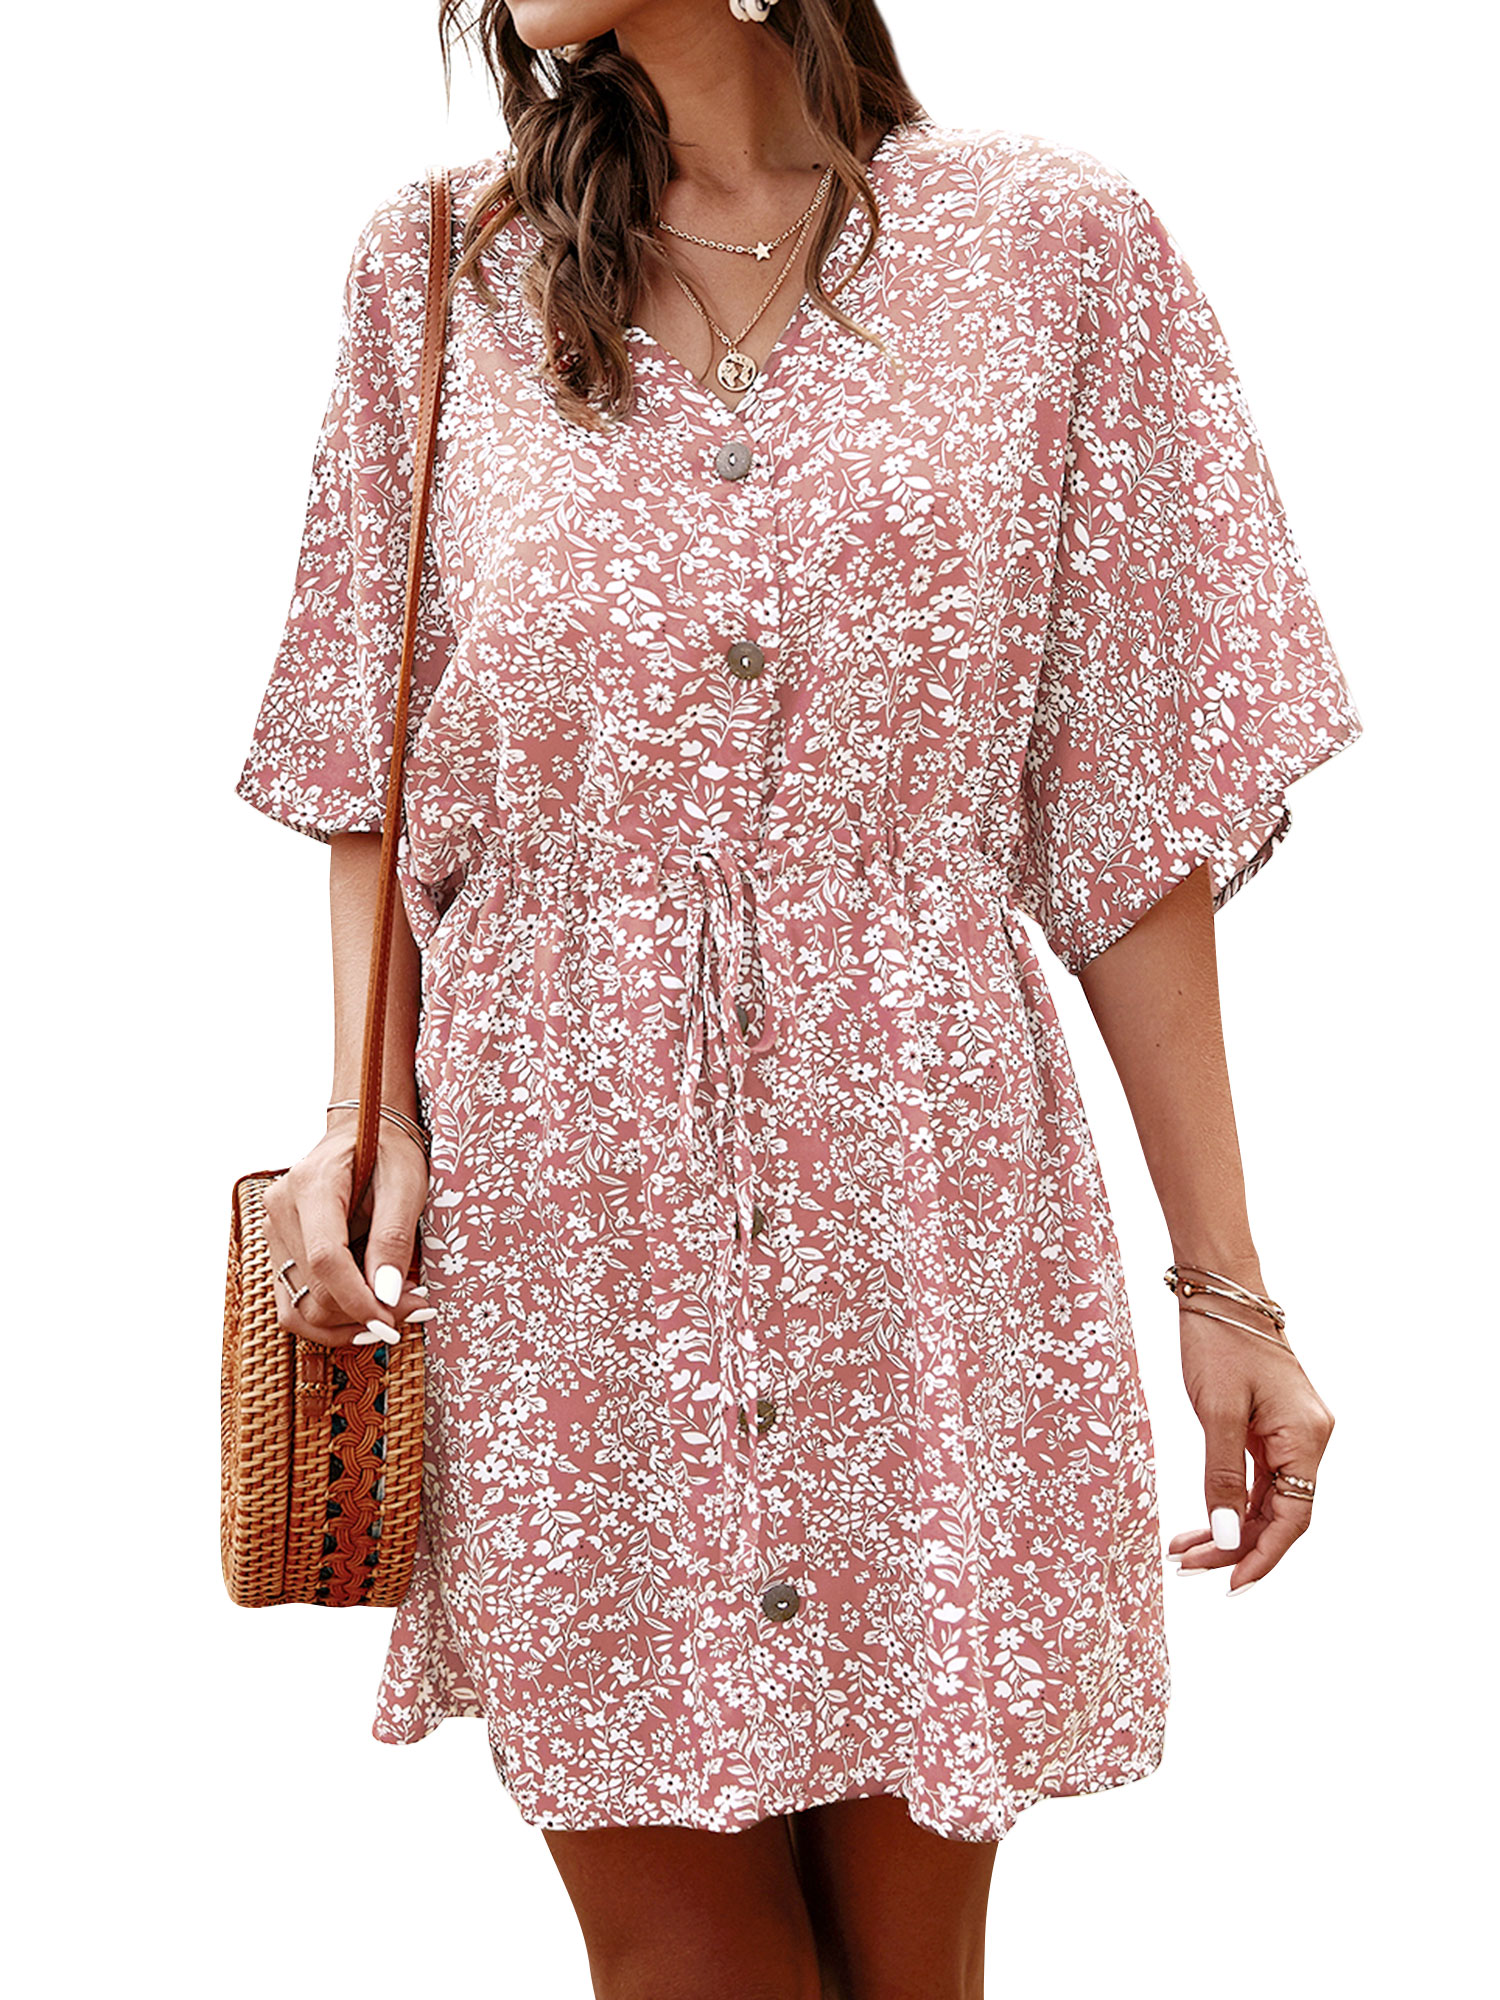 ZXZY Women Floral Printed Buttons Tie Waist Short Sleeves Mini Dress - image 4 of 12